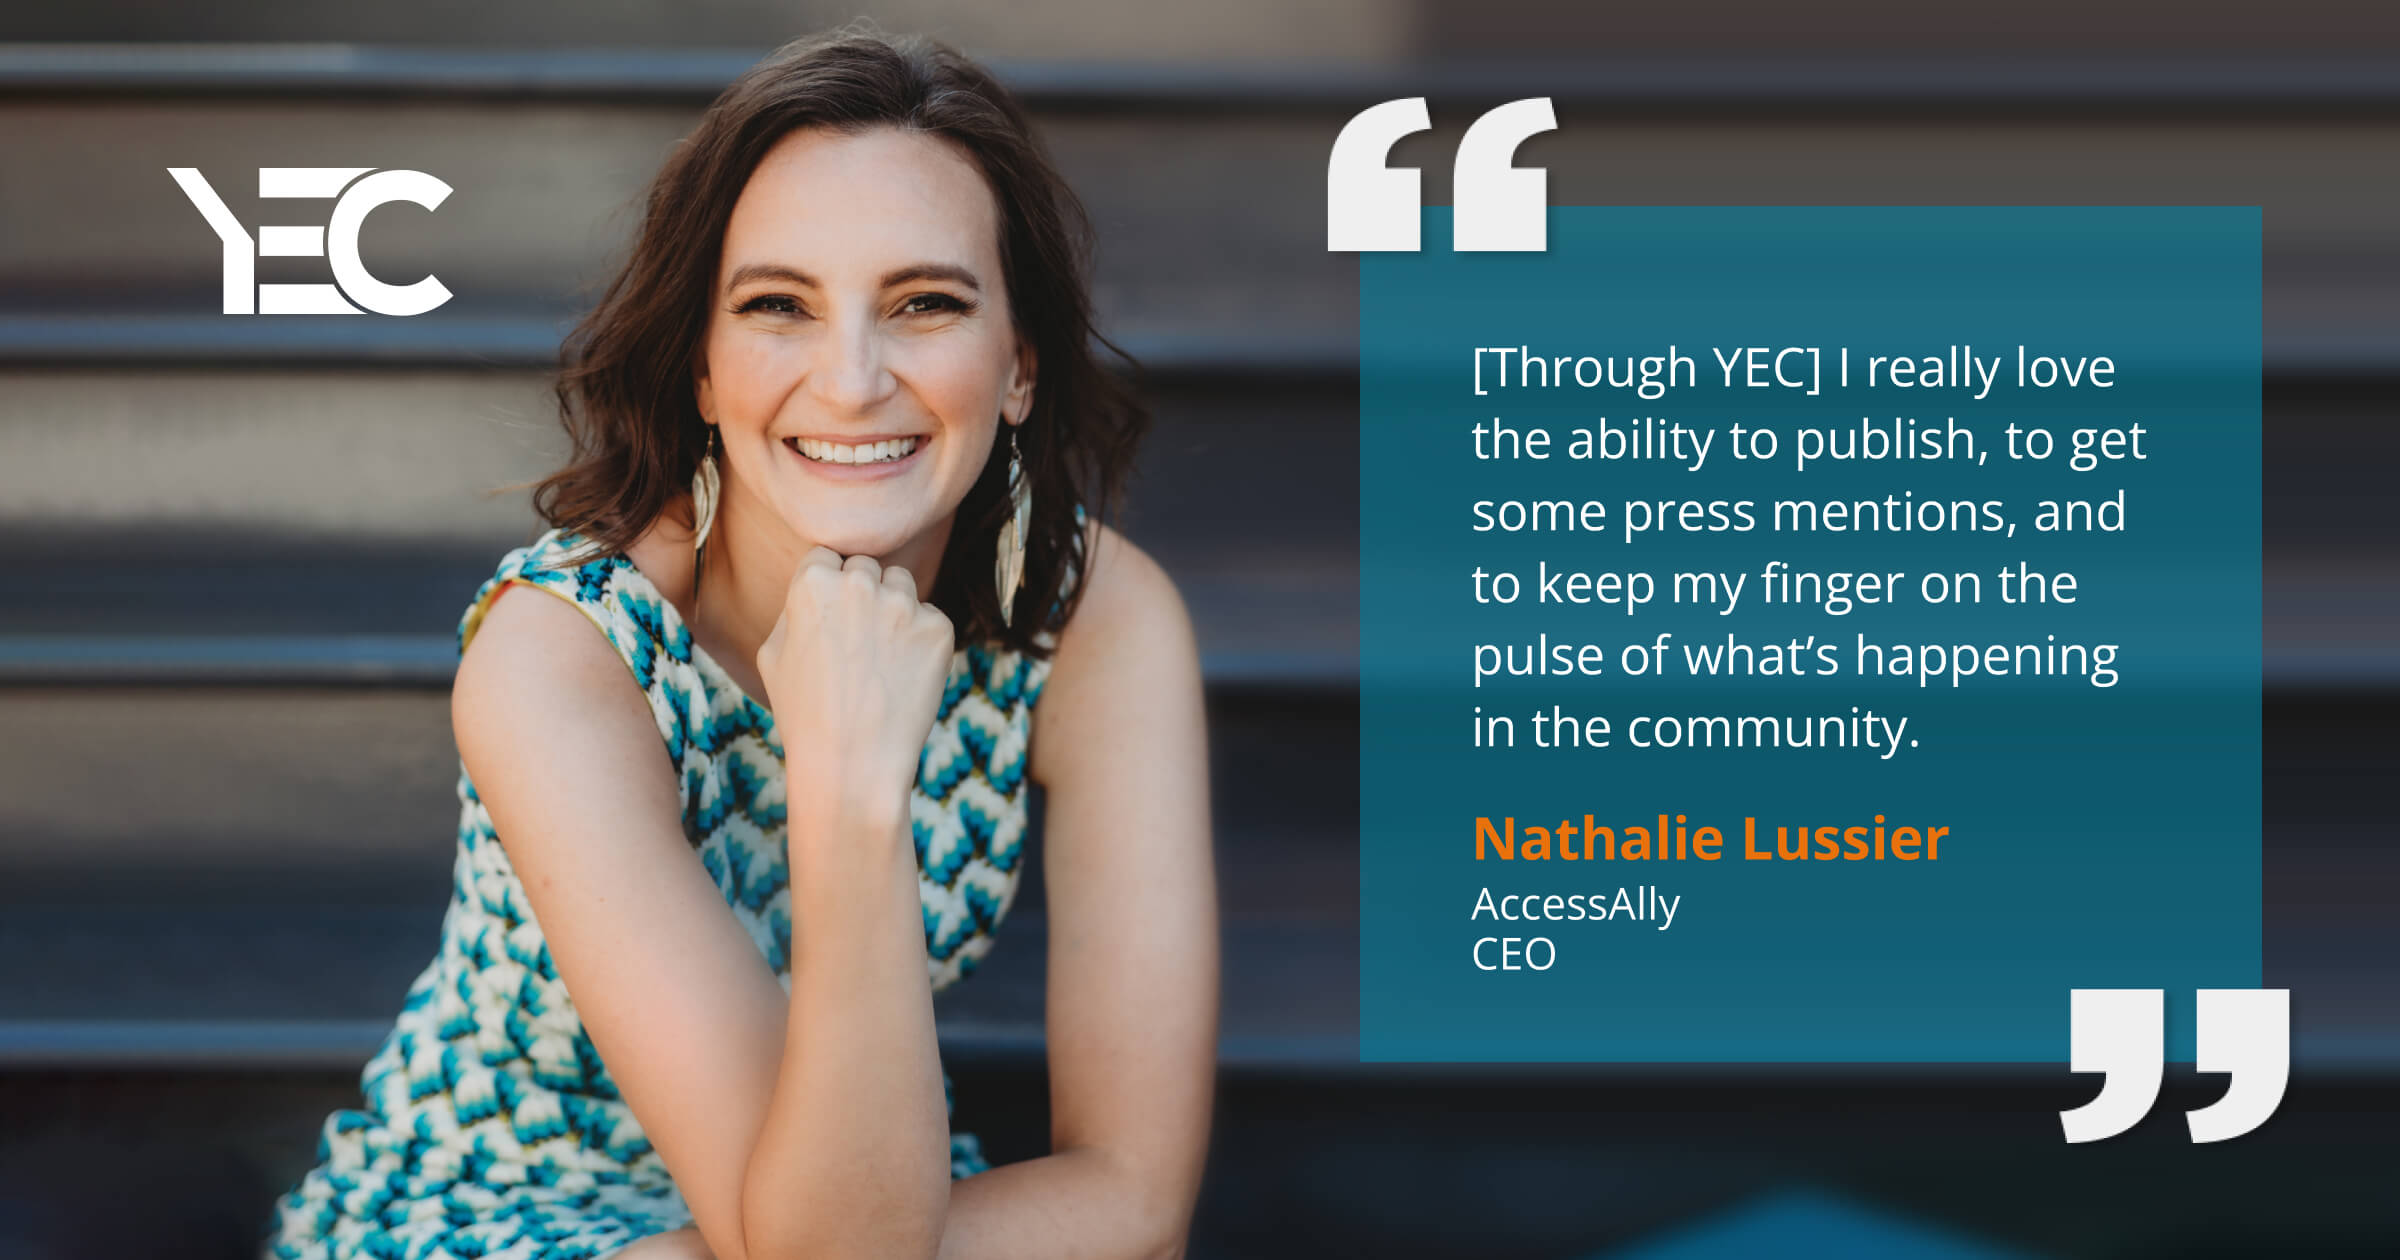 Nearly a Decade of YEC Value for Nathalie Lussier